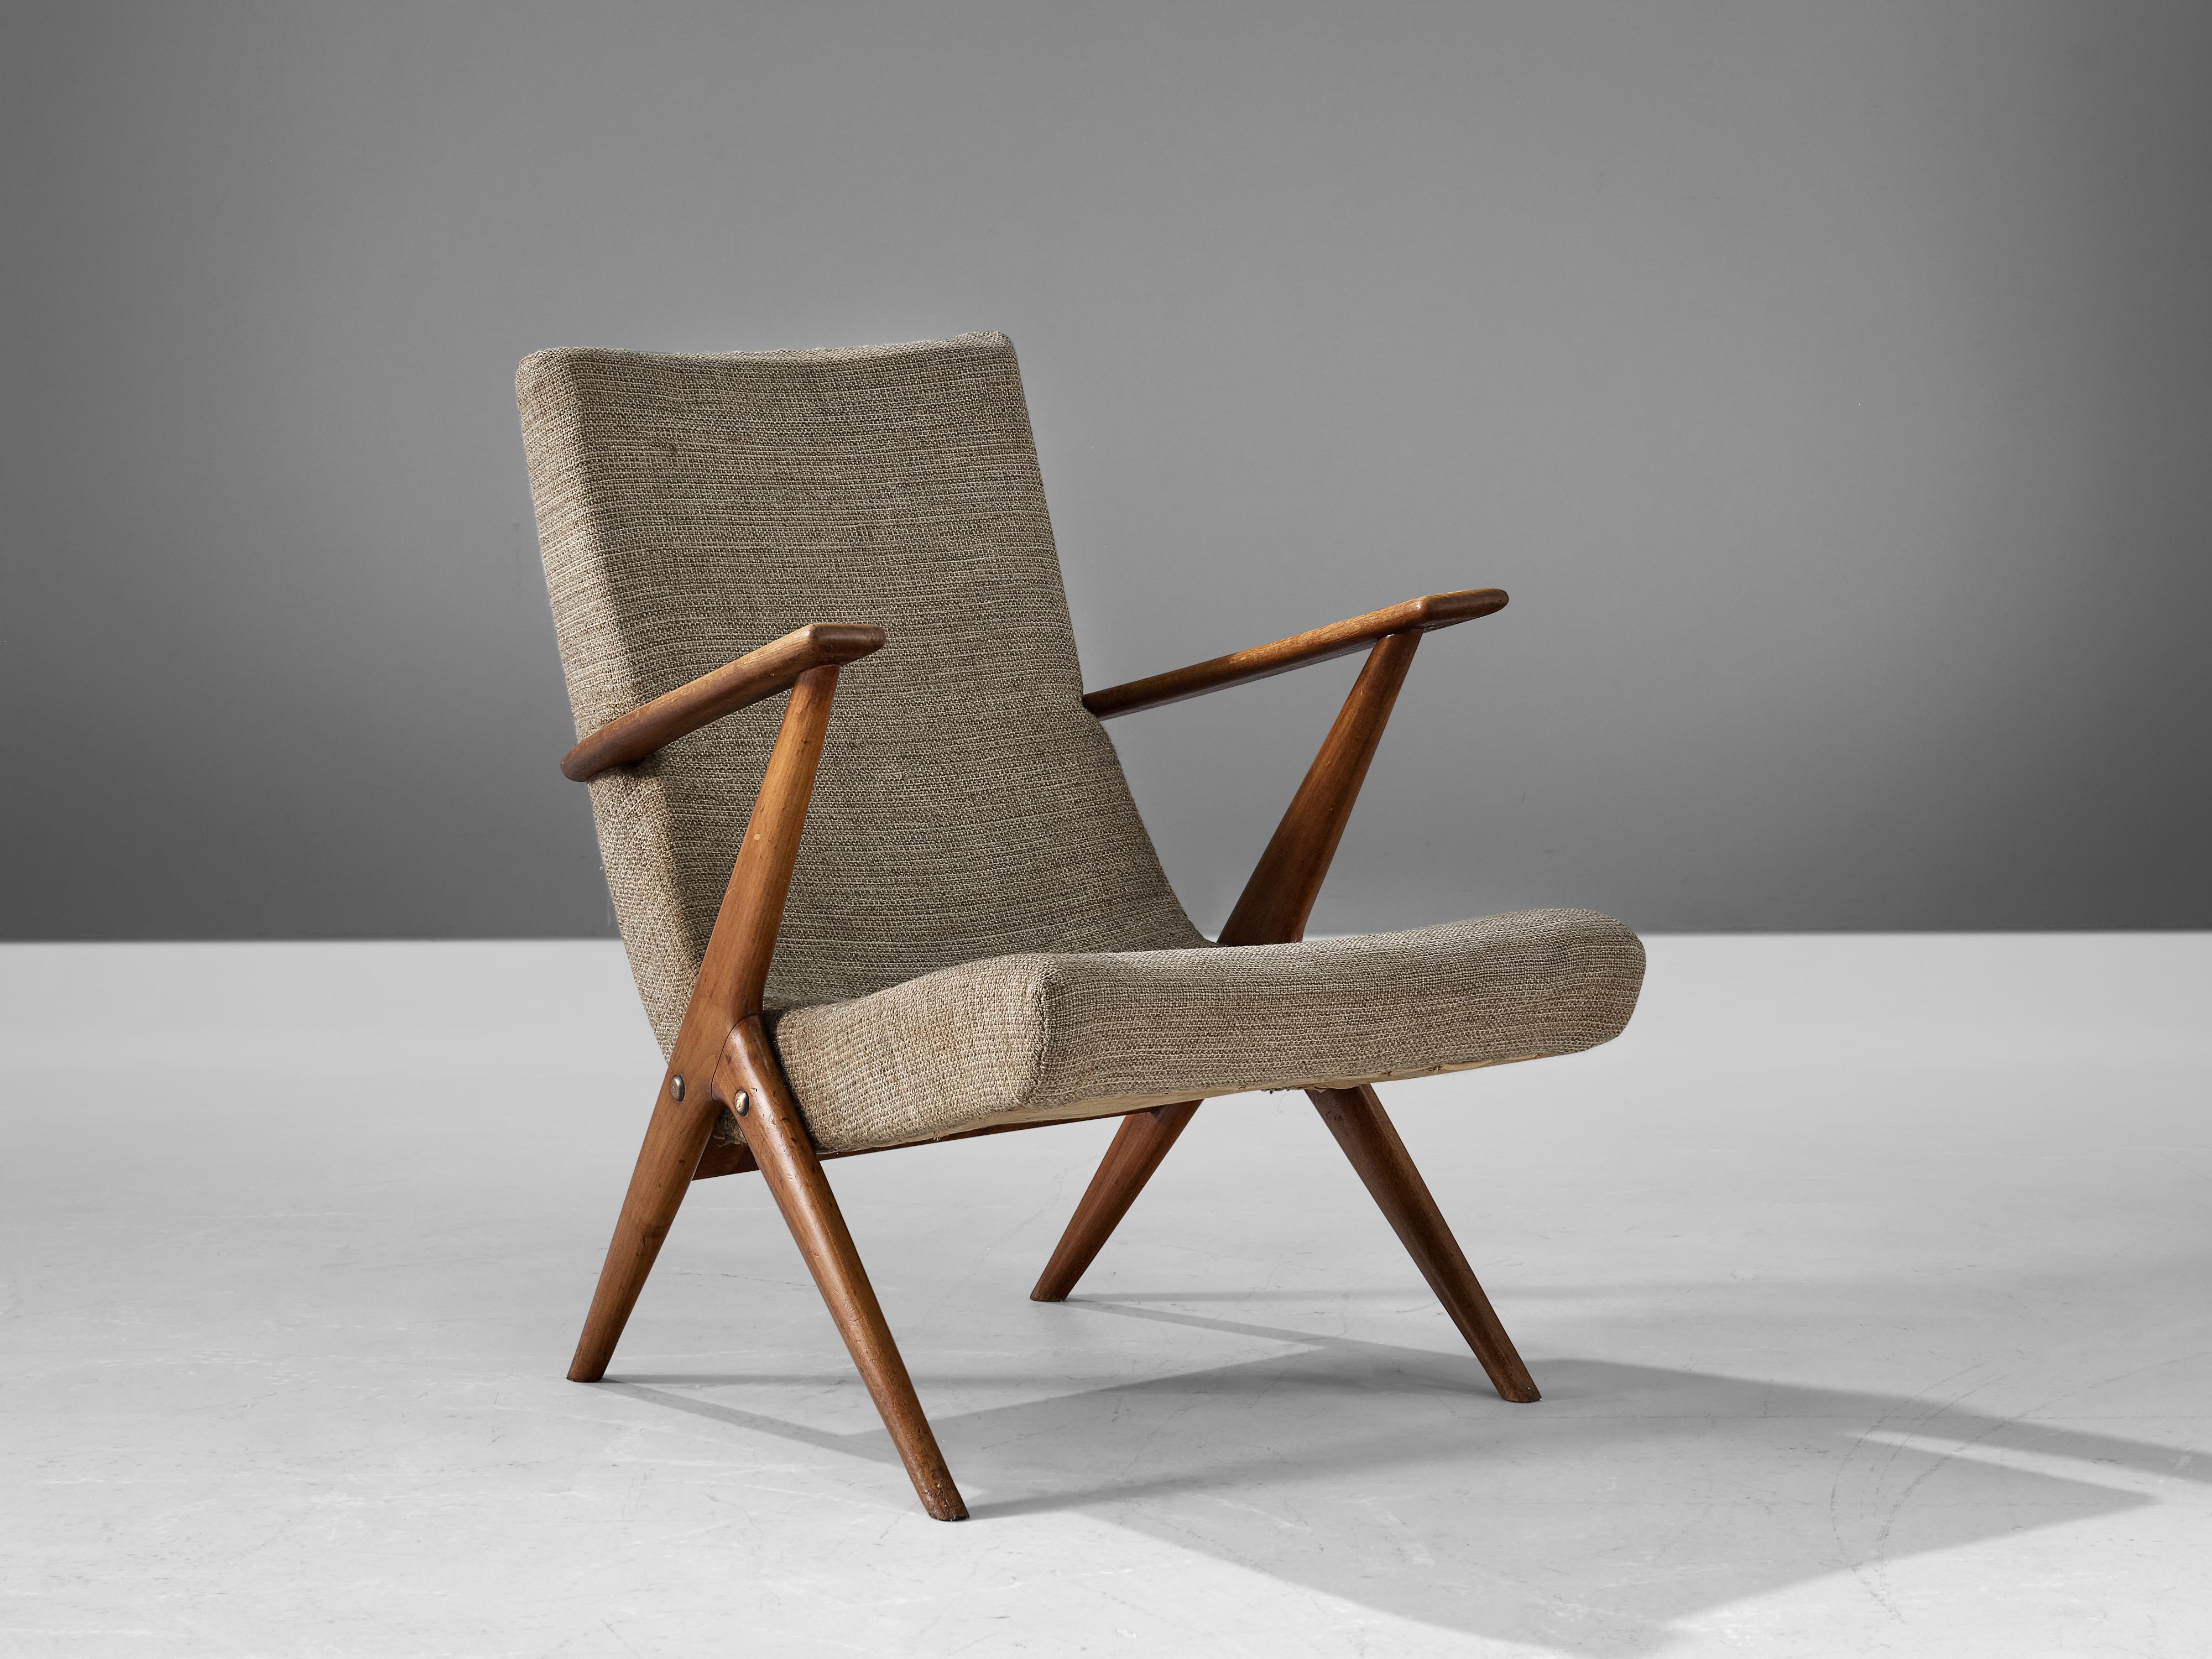 Armchair, cherry, beige fabric, Italy, 1950s

This chair is designed in Italy in the 1950s. The chair has a few distinct features that stand out. For instance the sculptural, upwards rising armrests. Additionally, the sculptural tapered legs and